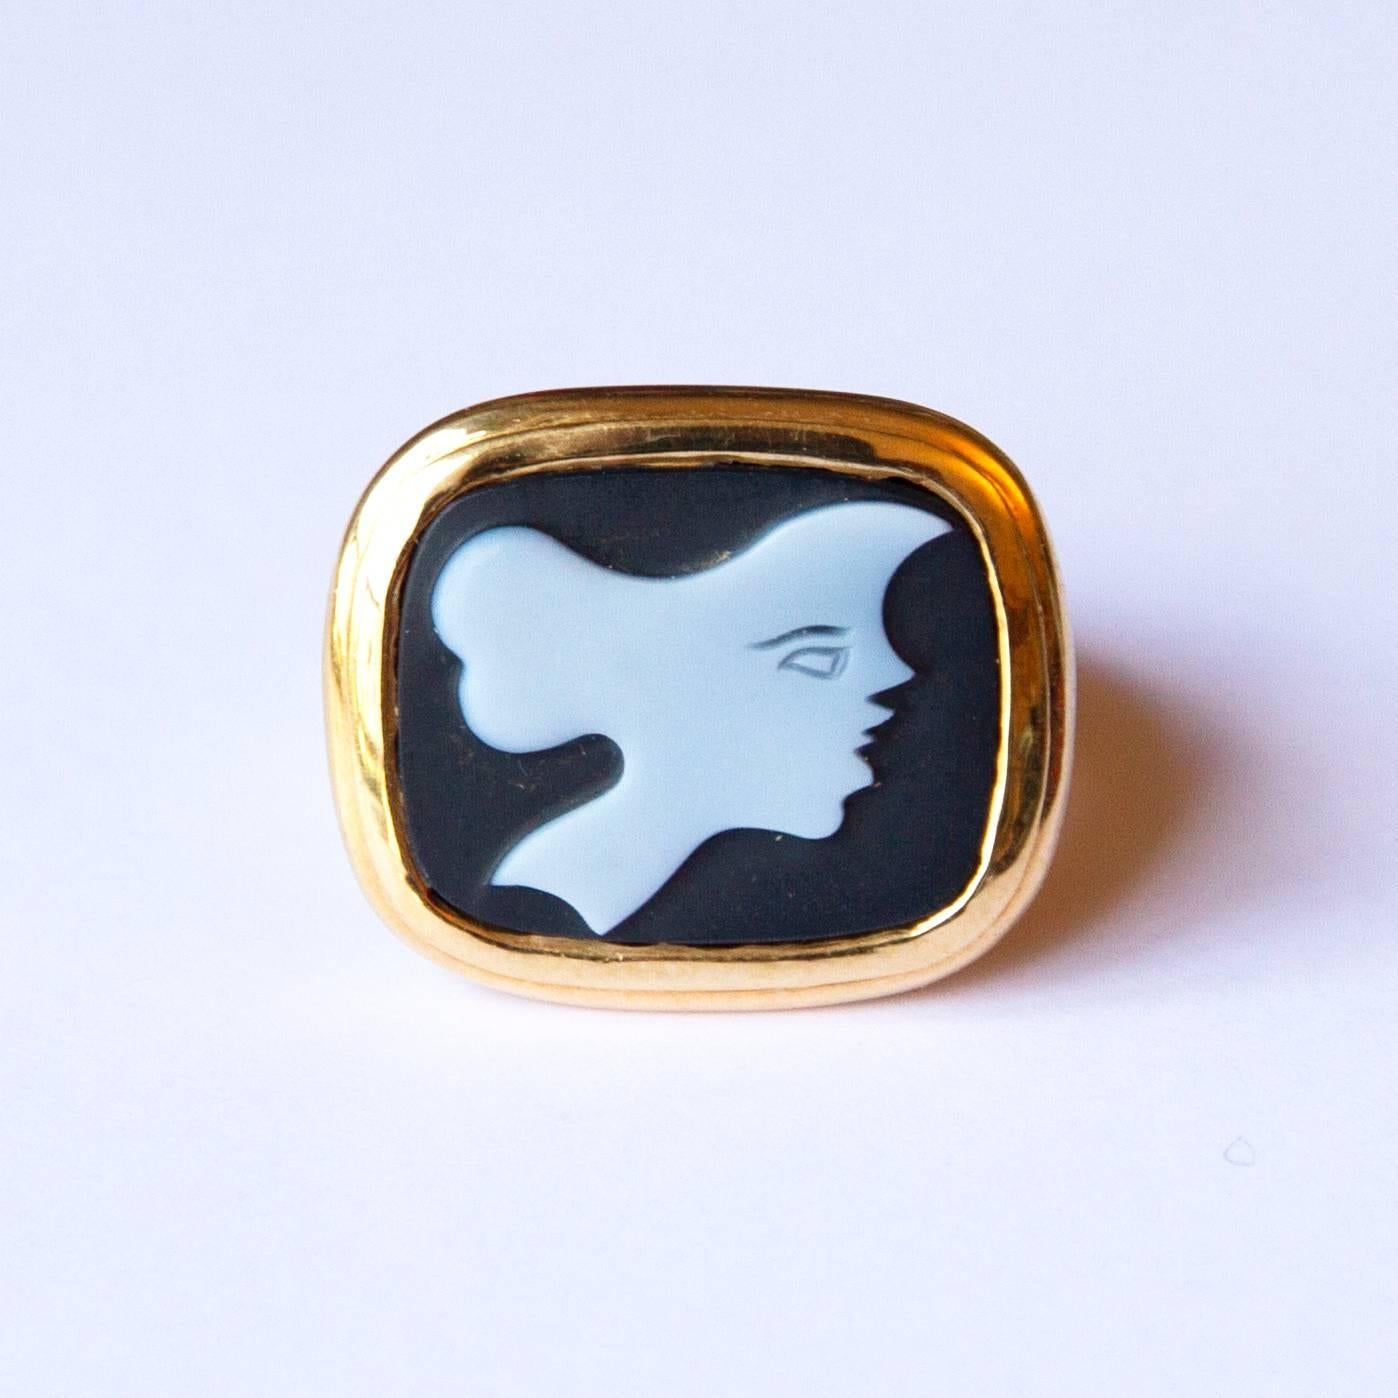 Unique 18K Gold and Black Agathe cameo ring by Georges Braque (1882-1963), inventor of cubism.  
The piece is called Hecate, after the Greek Goddess.  
It is signed "G. Braque" and marked "Exemplaire Unique" 
Size 53 (6 1/4)